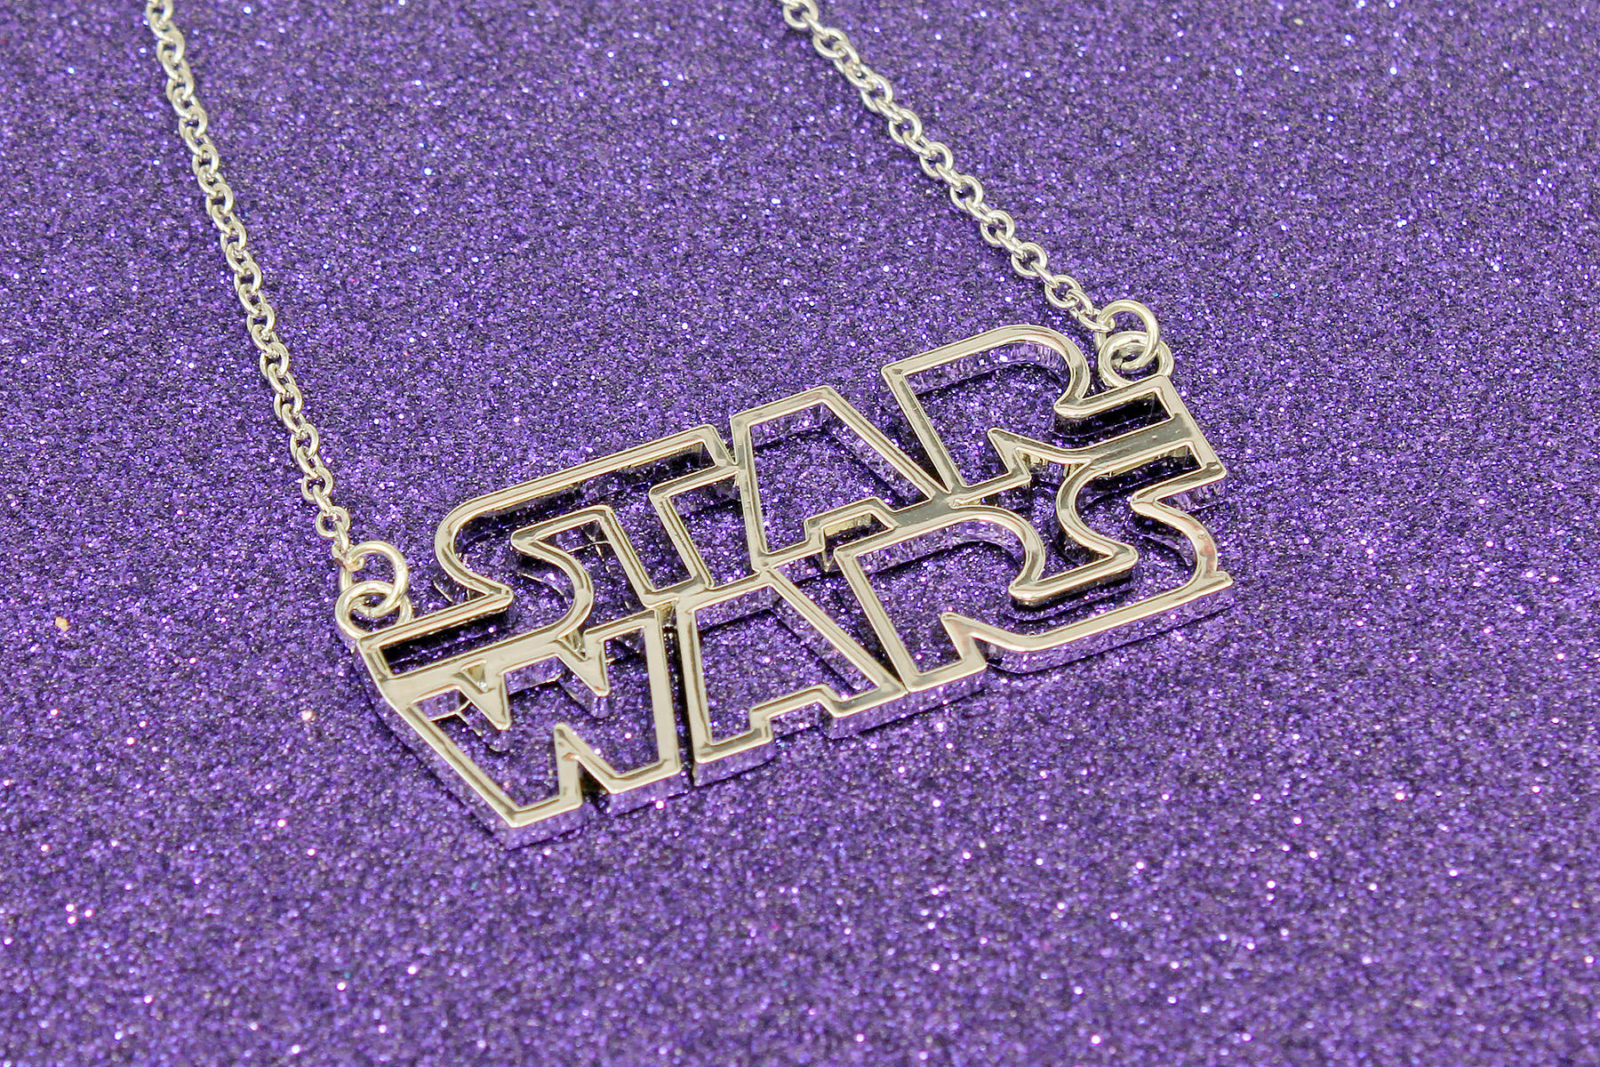 Review – Loungefly Star Wars logo necklace